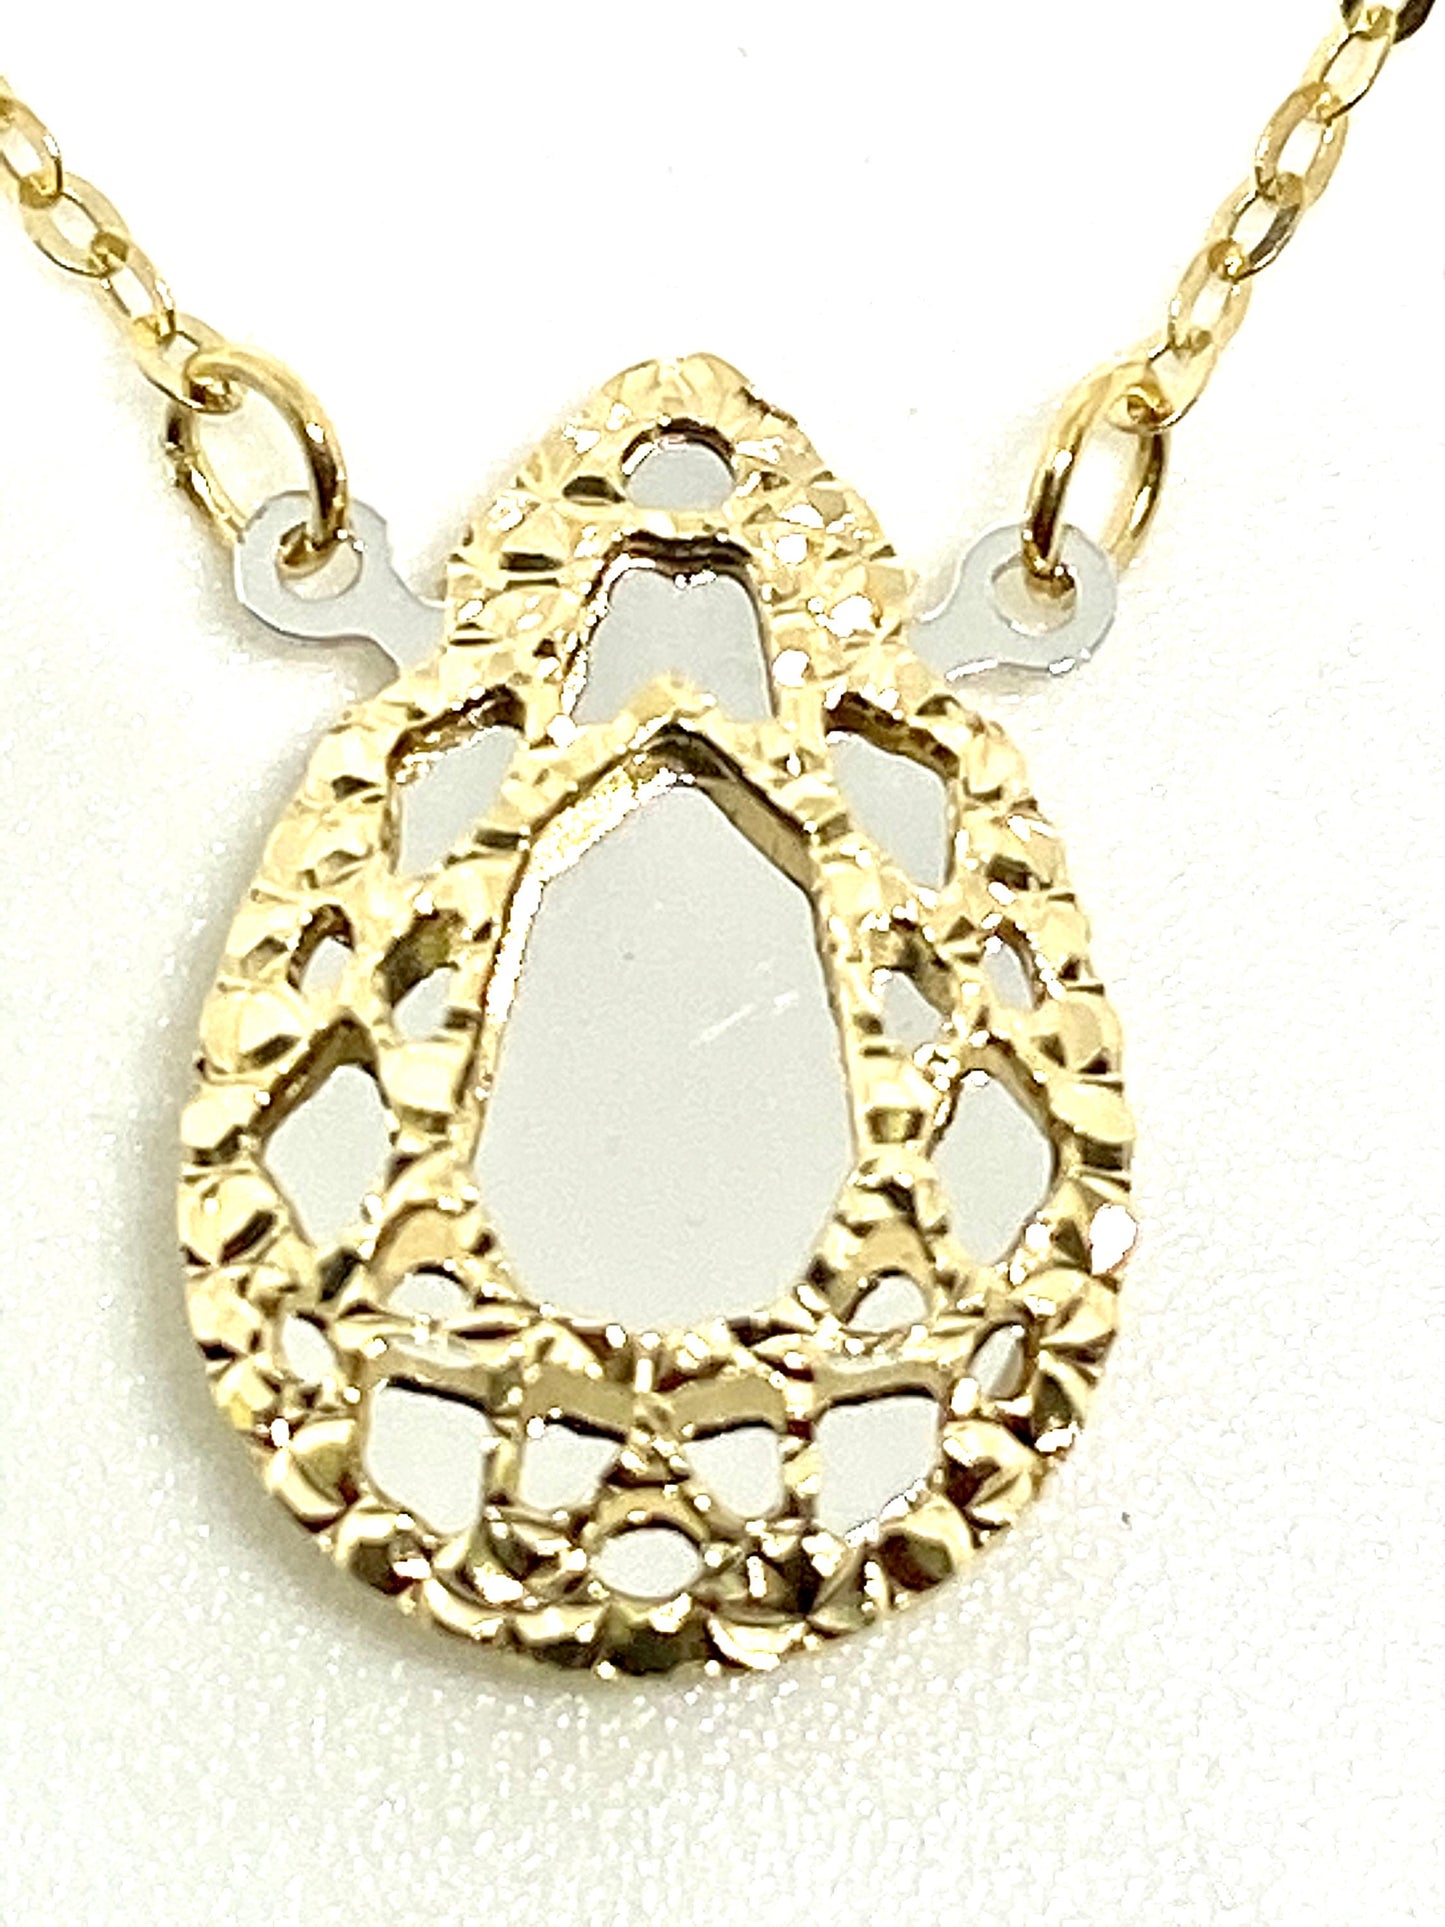 Yellow Gold Diamond Cut Pear Shaped Pendant Chain Necklace